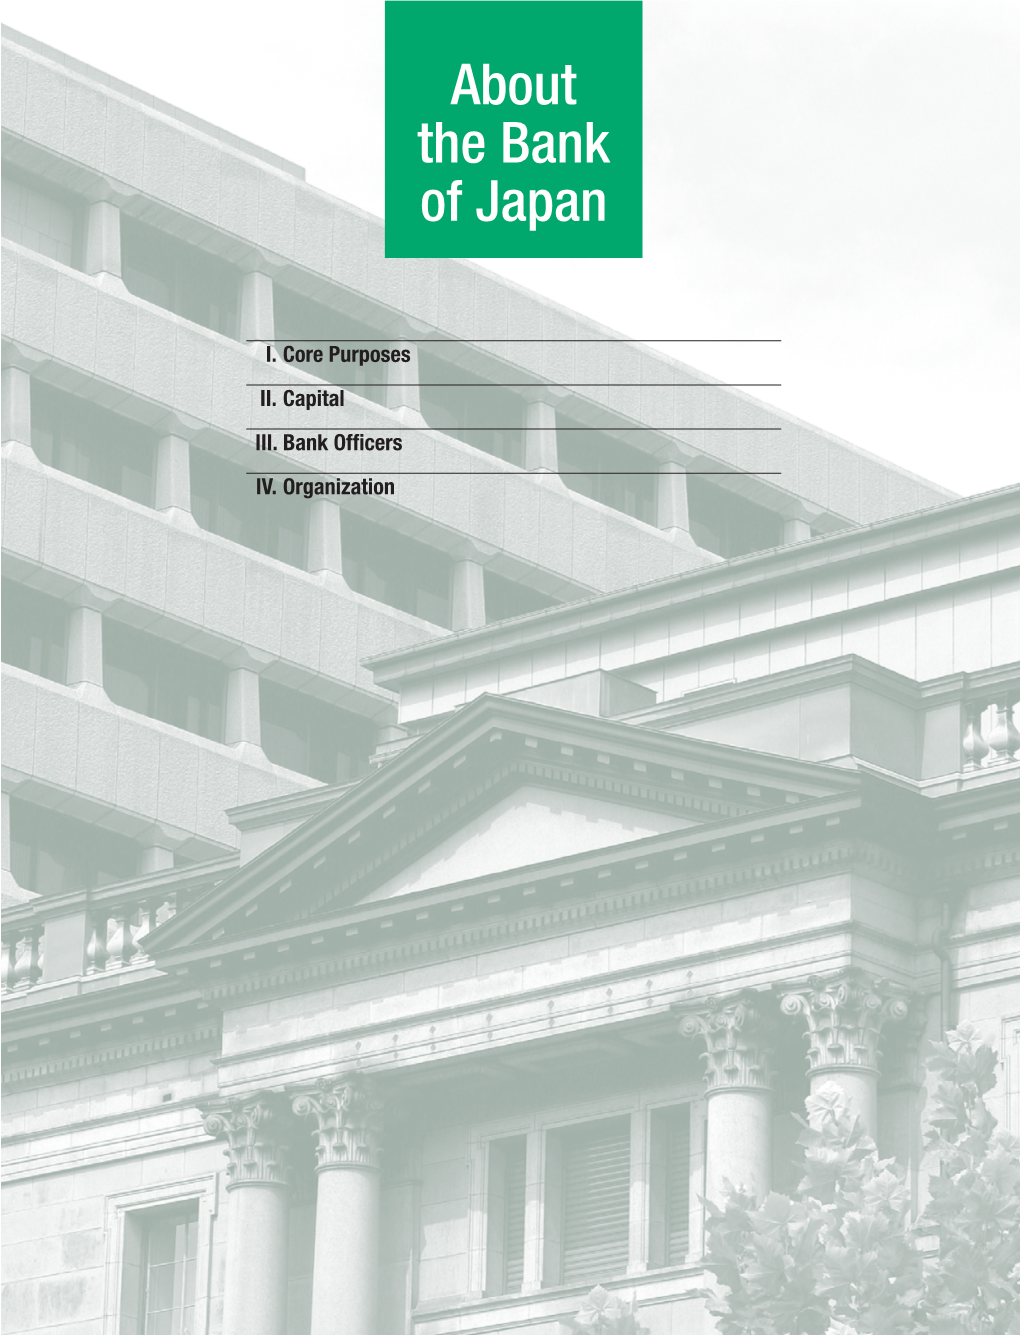 About the Bank of Japan